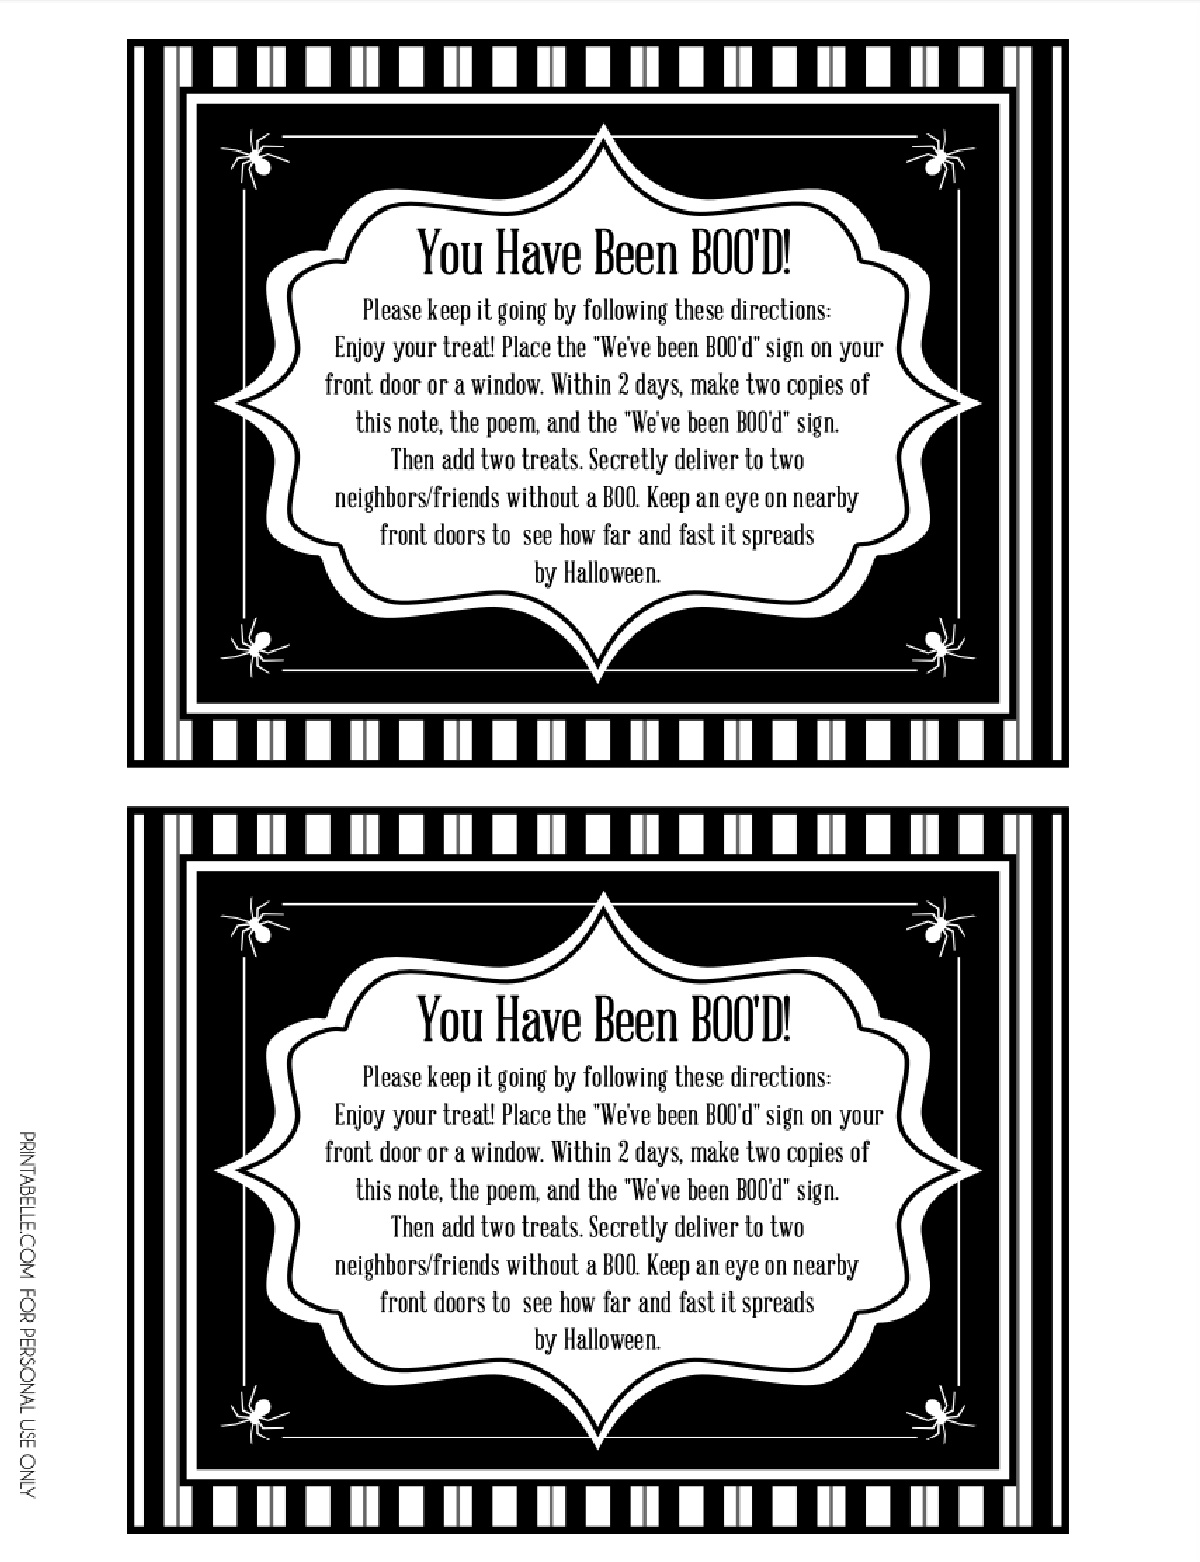 "You've Been BOOed" Halloween Explanation Cards